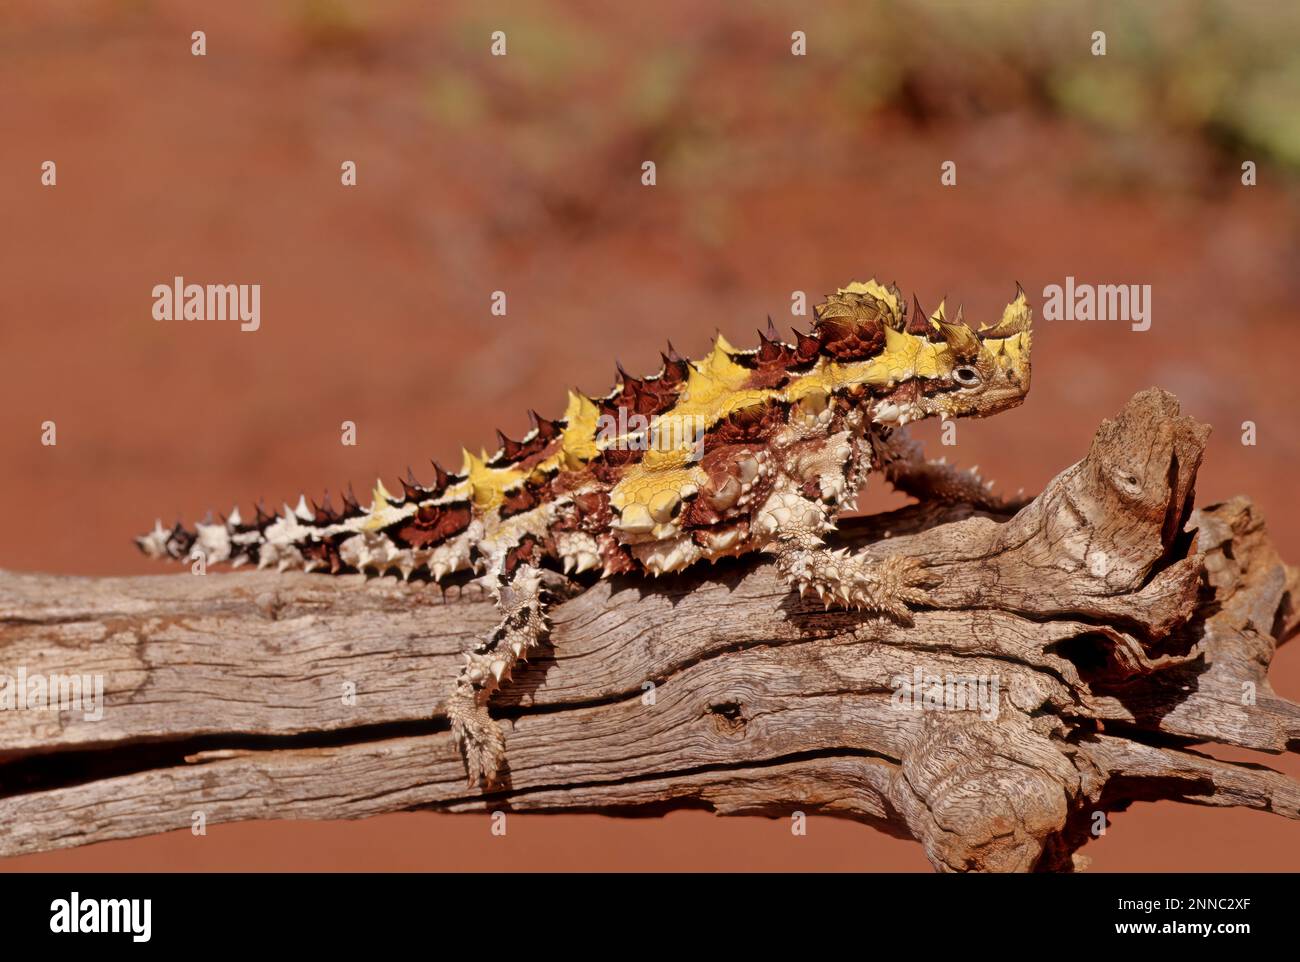 The thorny devil (Moloch horridus), also known commonly as the mountain devil, thorny lizard, thorny dragon, and moloch, is a species of lizard in the Stock Photo